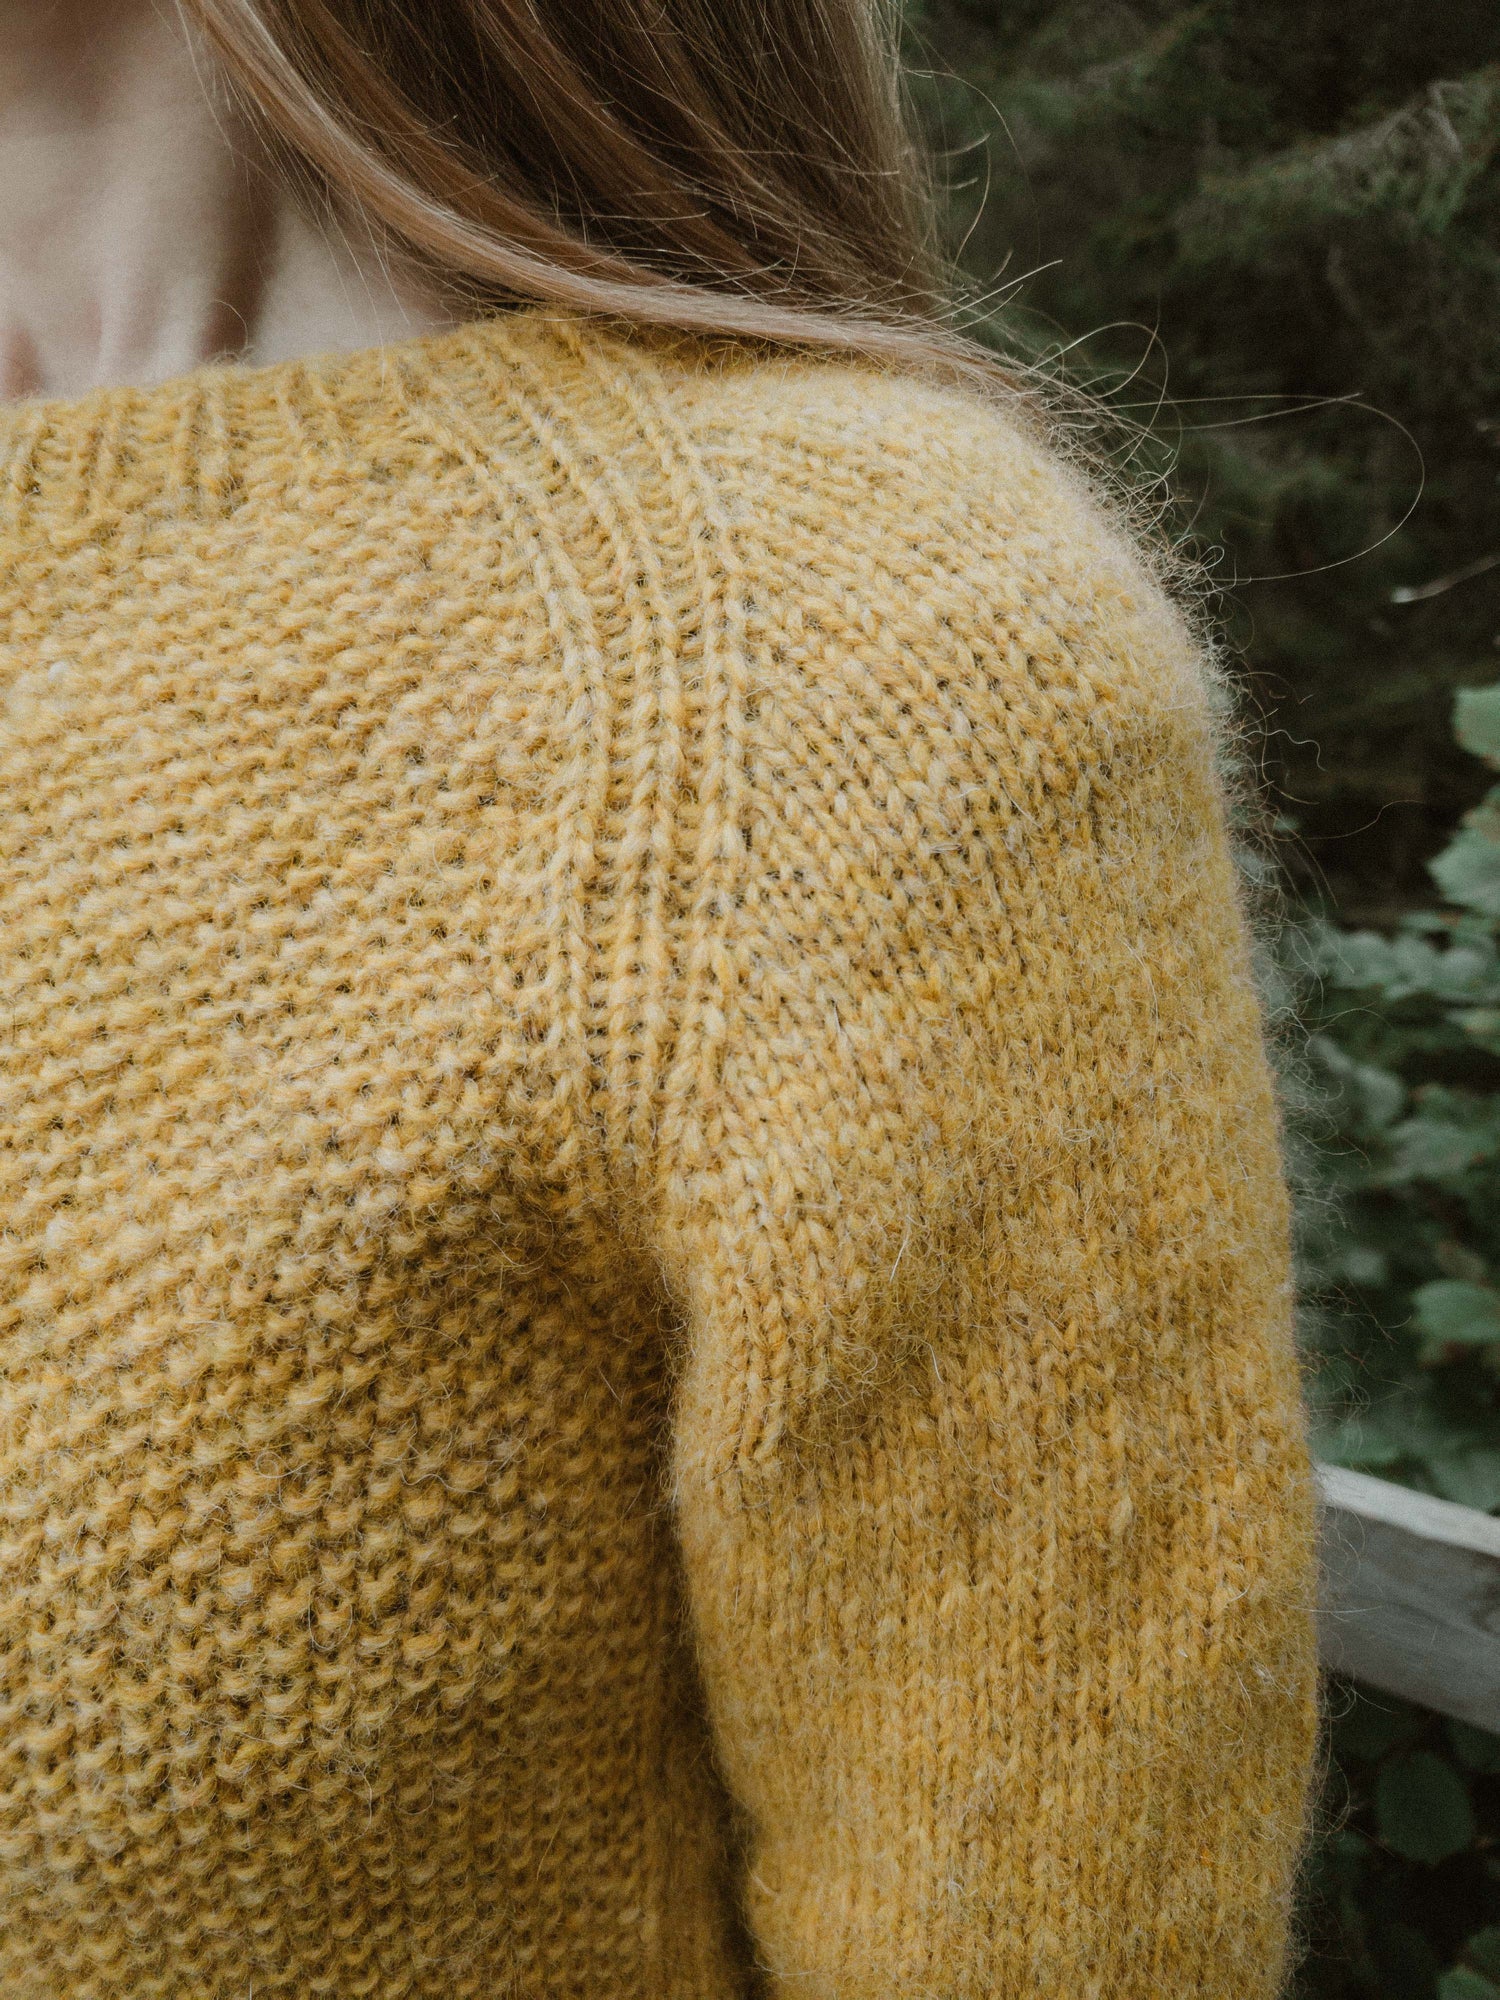 Close-up of the ribbed raglan seam and textured seed stitch on the 'Before Fall Sweater' by Ulven, presented in amber-yellow. The garment, worn by the designer, is set against a soft-focus background of green foliage and is crafted with unspun Nutiden yarn from Höner och Eir.